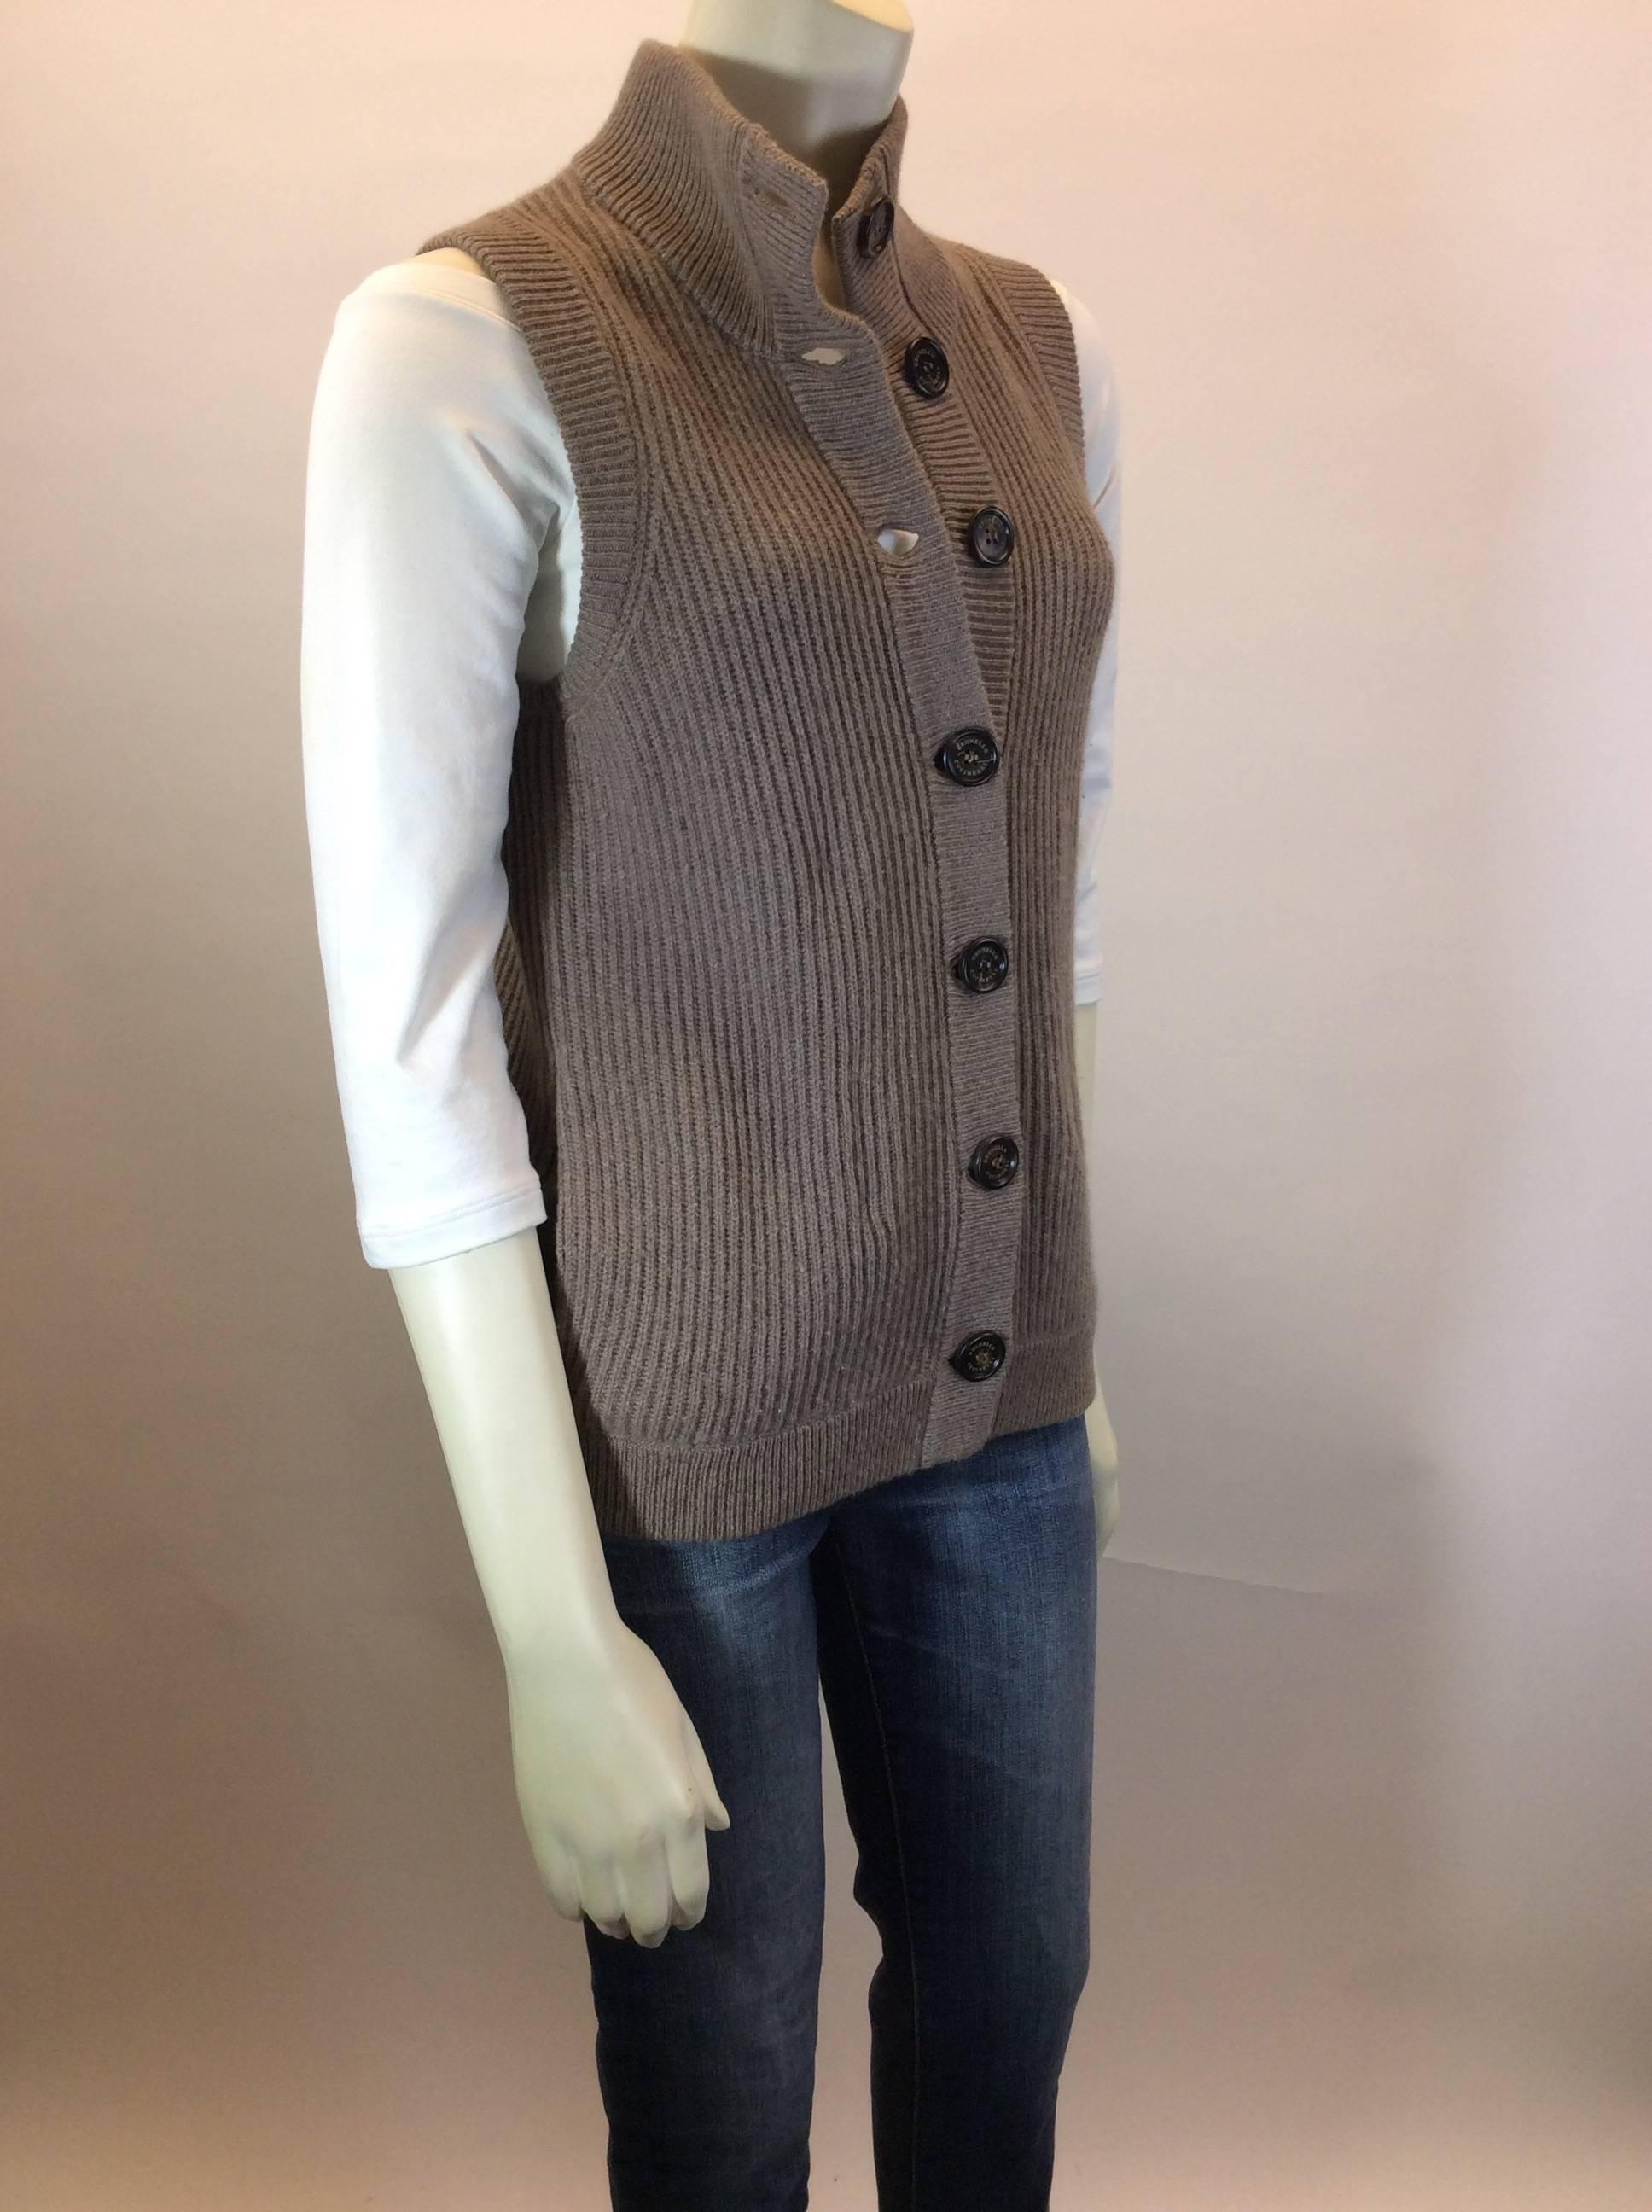 Light Tan/Brown 
Cable Knit Sleeveless Sweater 
100% Cashmere 
Dark Brown Buttons Along front for Closure 
One Single Pocket on Both Sides of Vest 